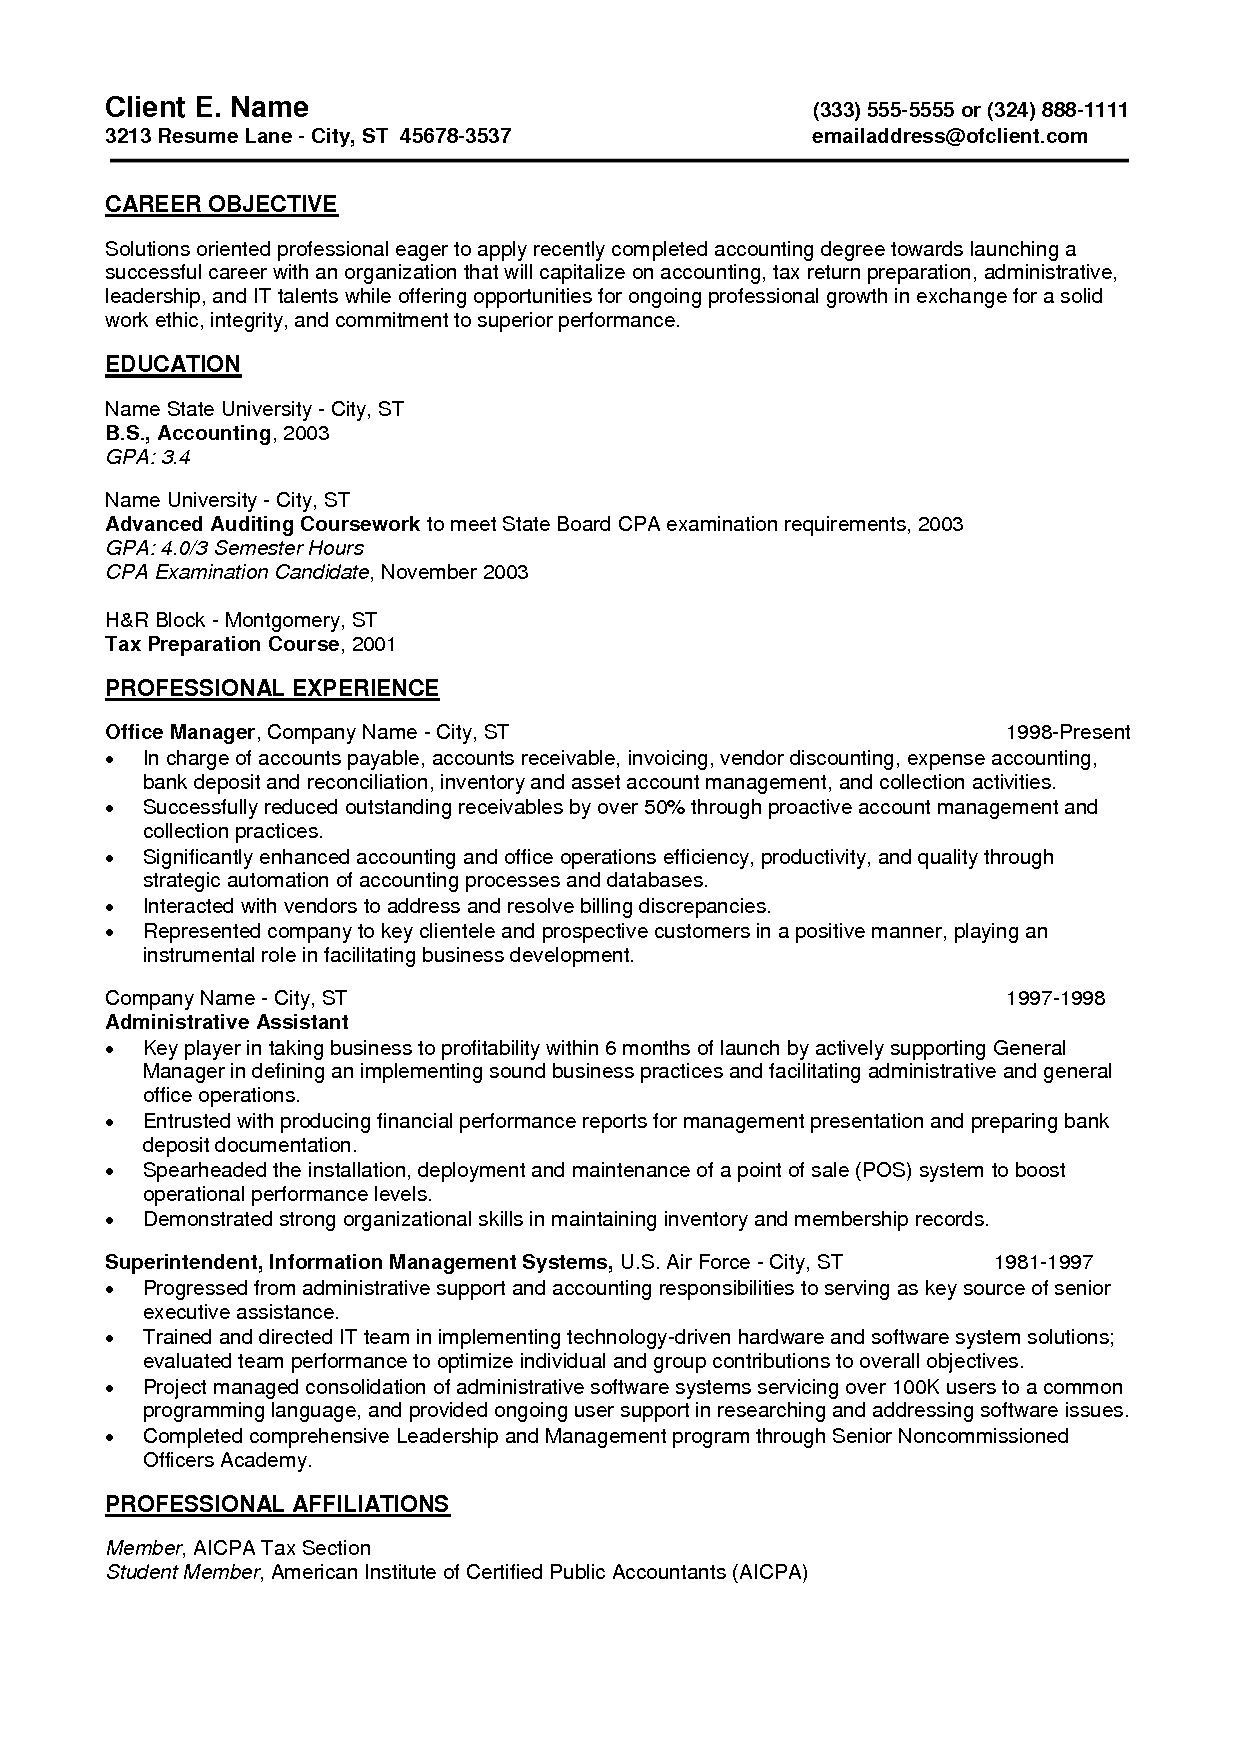 Free Resume Templates for Entry Level Jobs Resume Examples Entry Level – Resume Templates Job Resume …